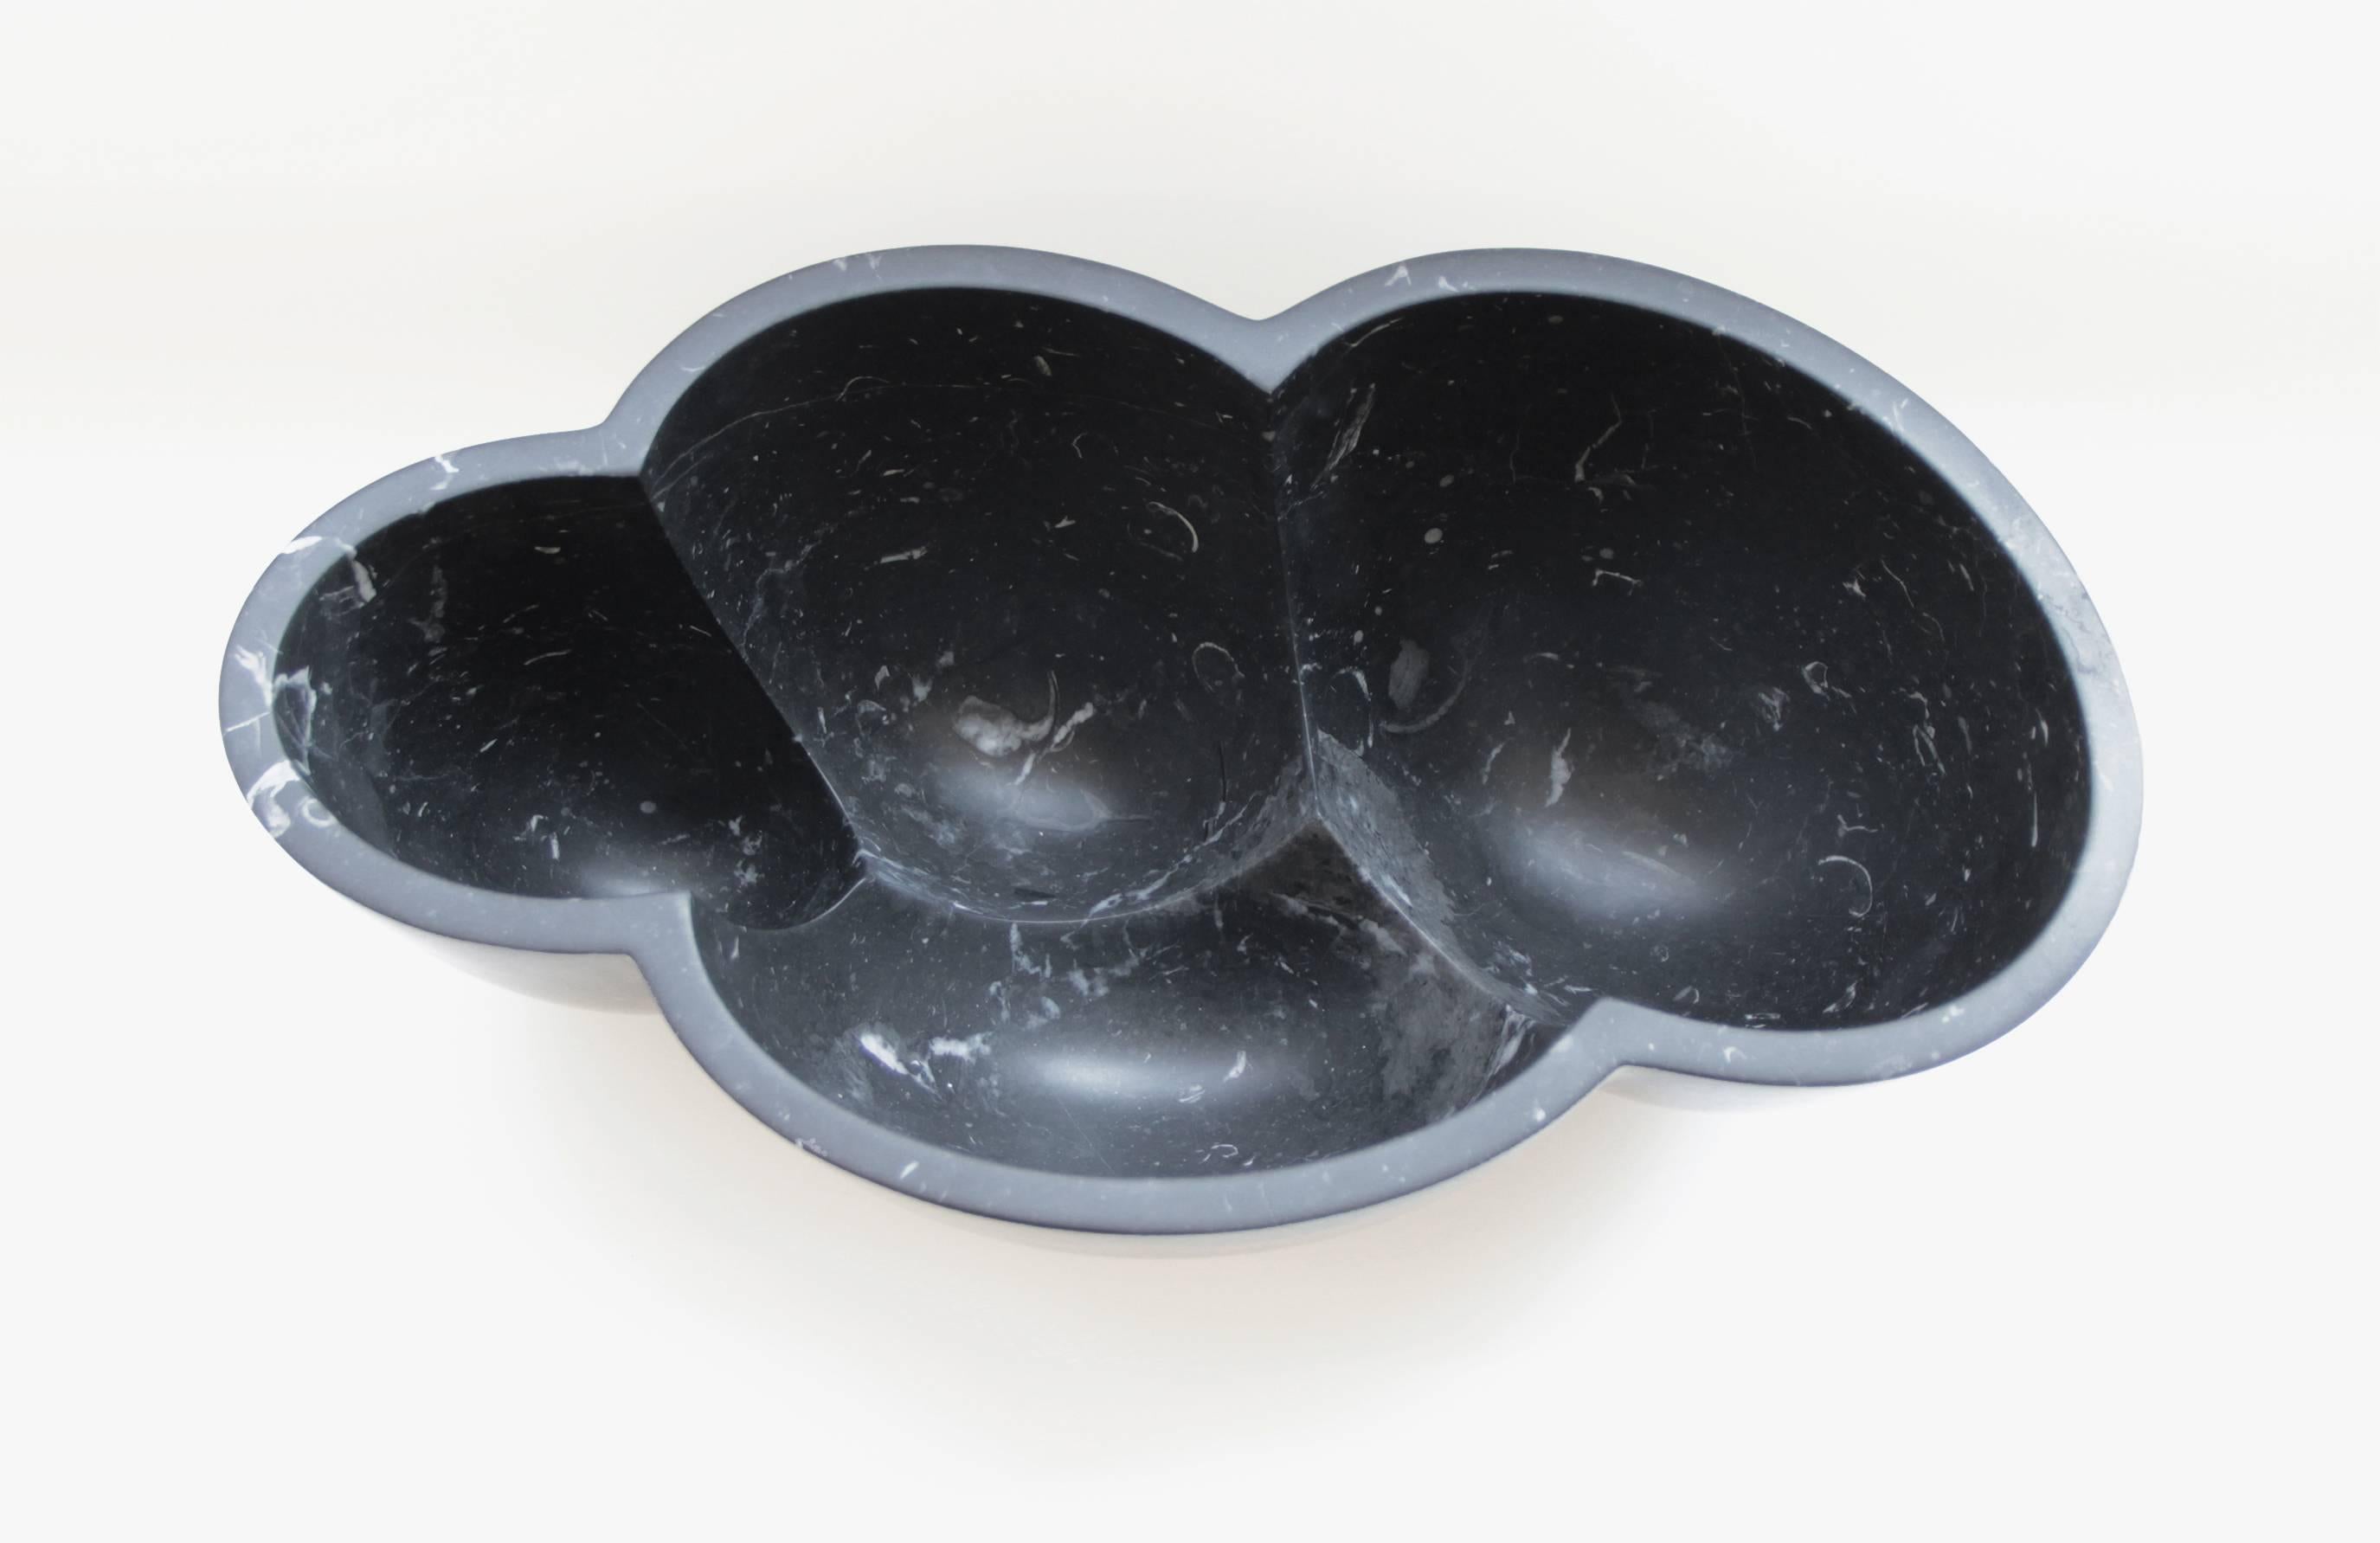 Made in Italy, the 'Nube' black marble vessel is inspired by clouds and amorphous designs found in nature. Skillfully carved from Nero Marquina marble, and utilizing CNC technology this sculptural bowl is honed finished by hand. Through refined